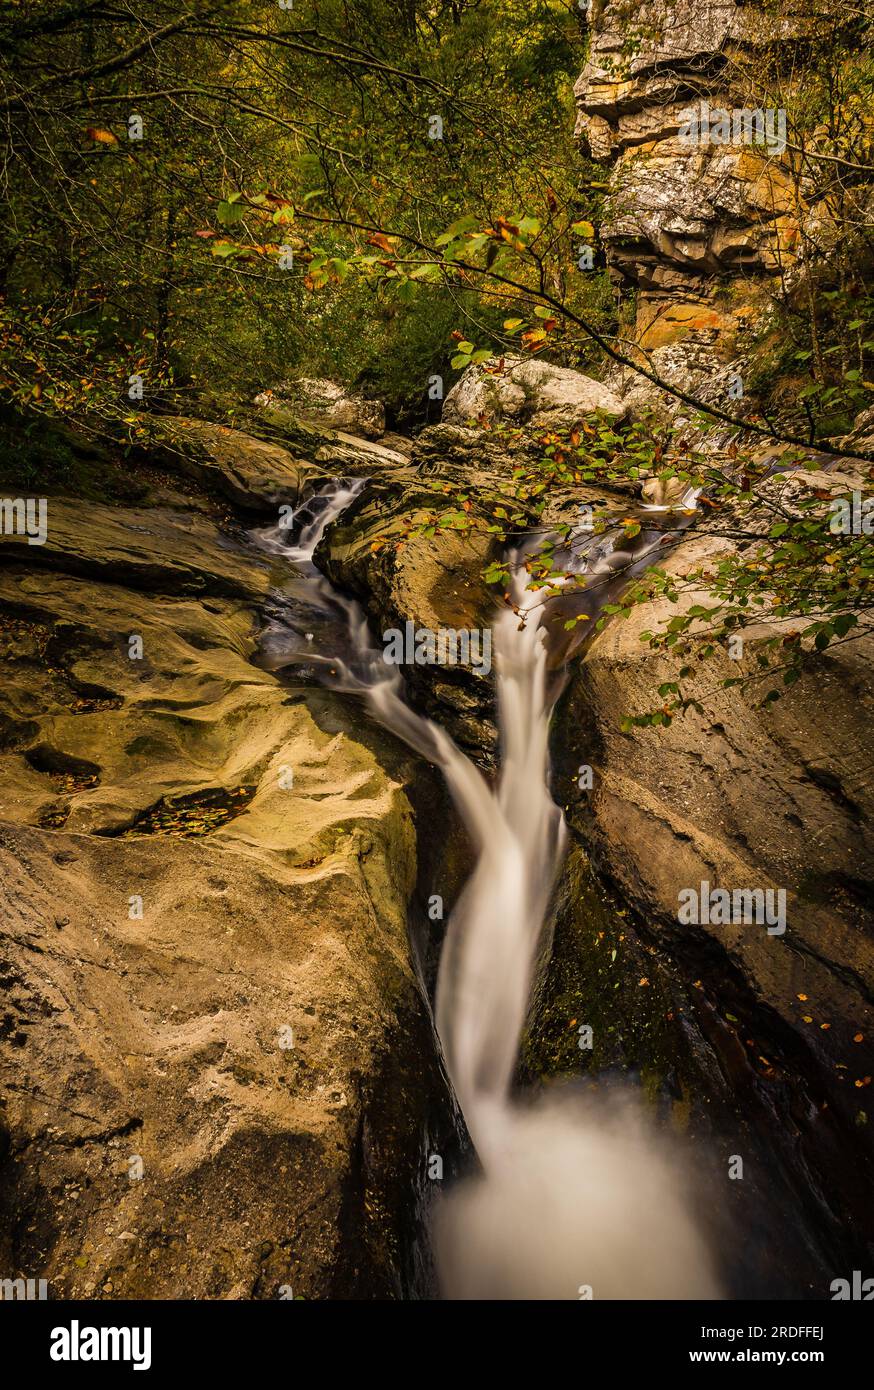 CAPTURE OF A WATERFALL IN THE SAJA-BESAYA VALLEY, CANTABRIA, TAKEN IN OCTOBER 2022 Stock Photo